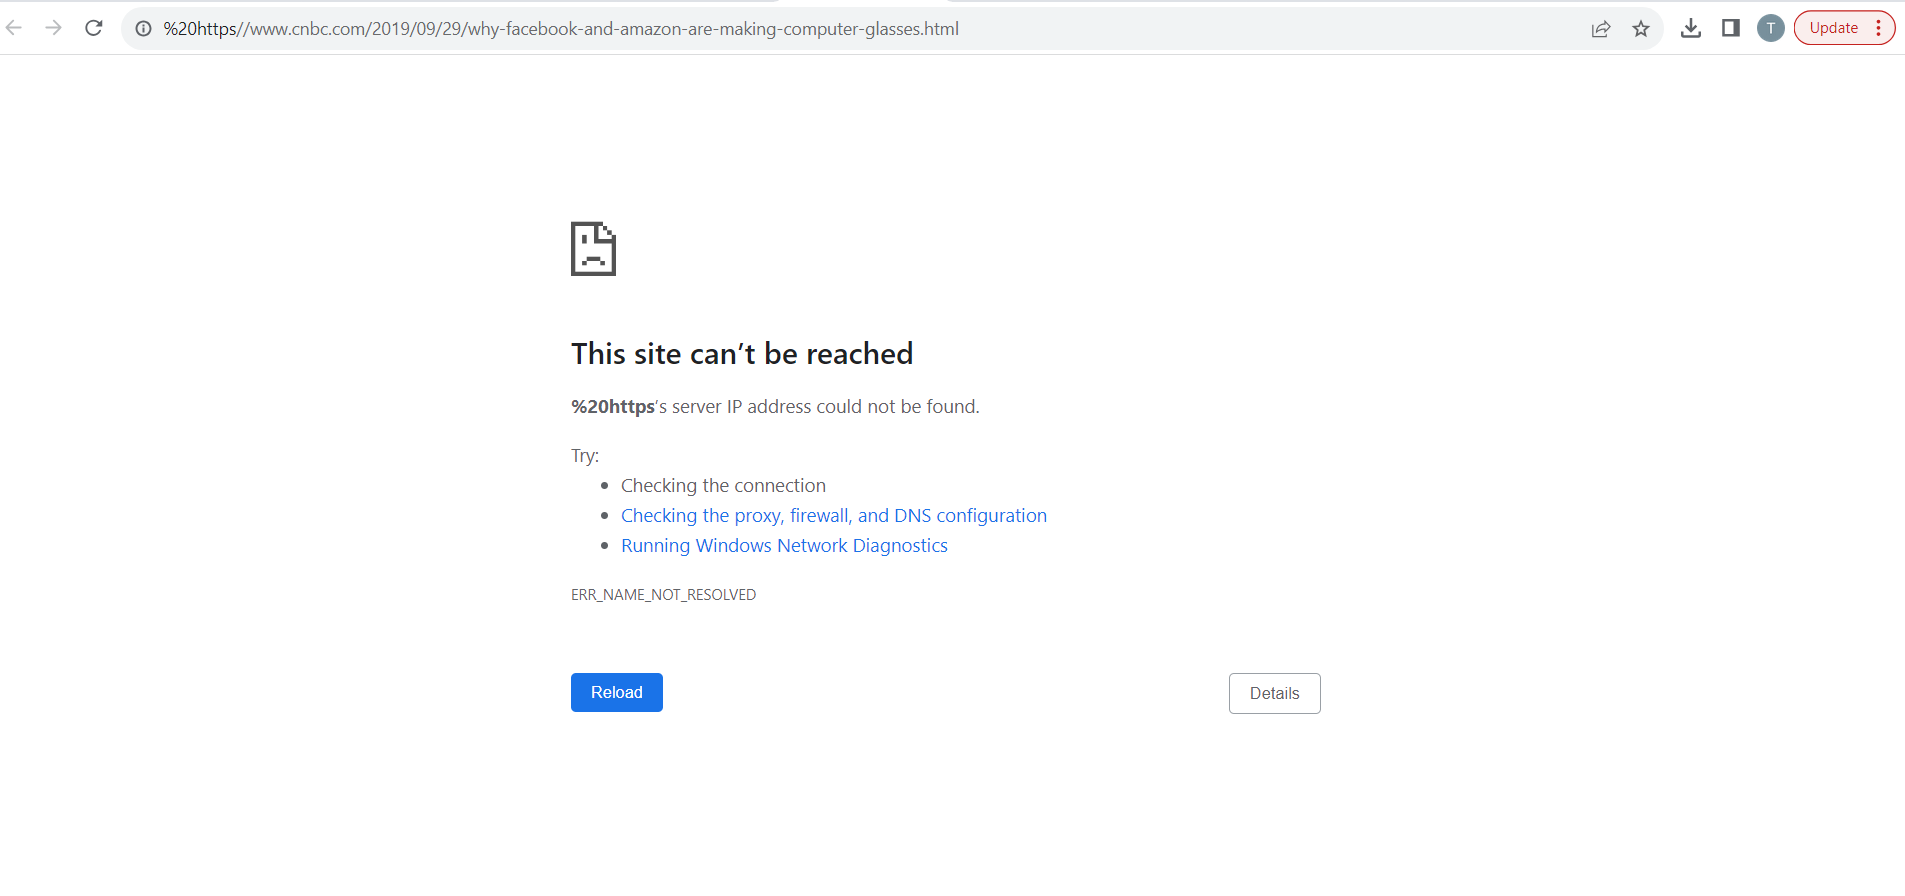 Invalid host page opens after clicking 'According to Mark Zuckerberg' link